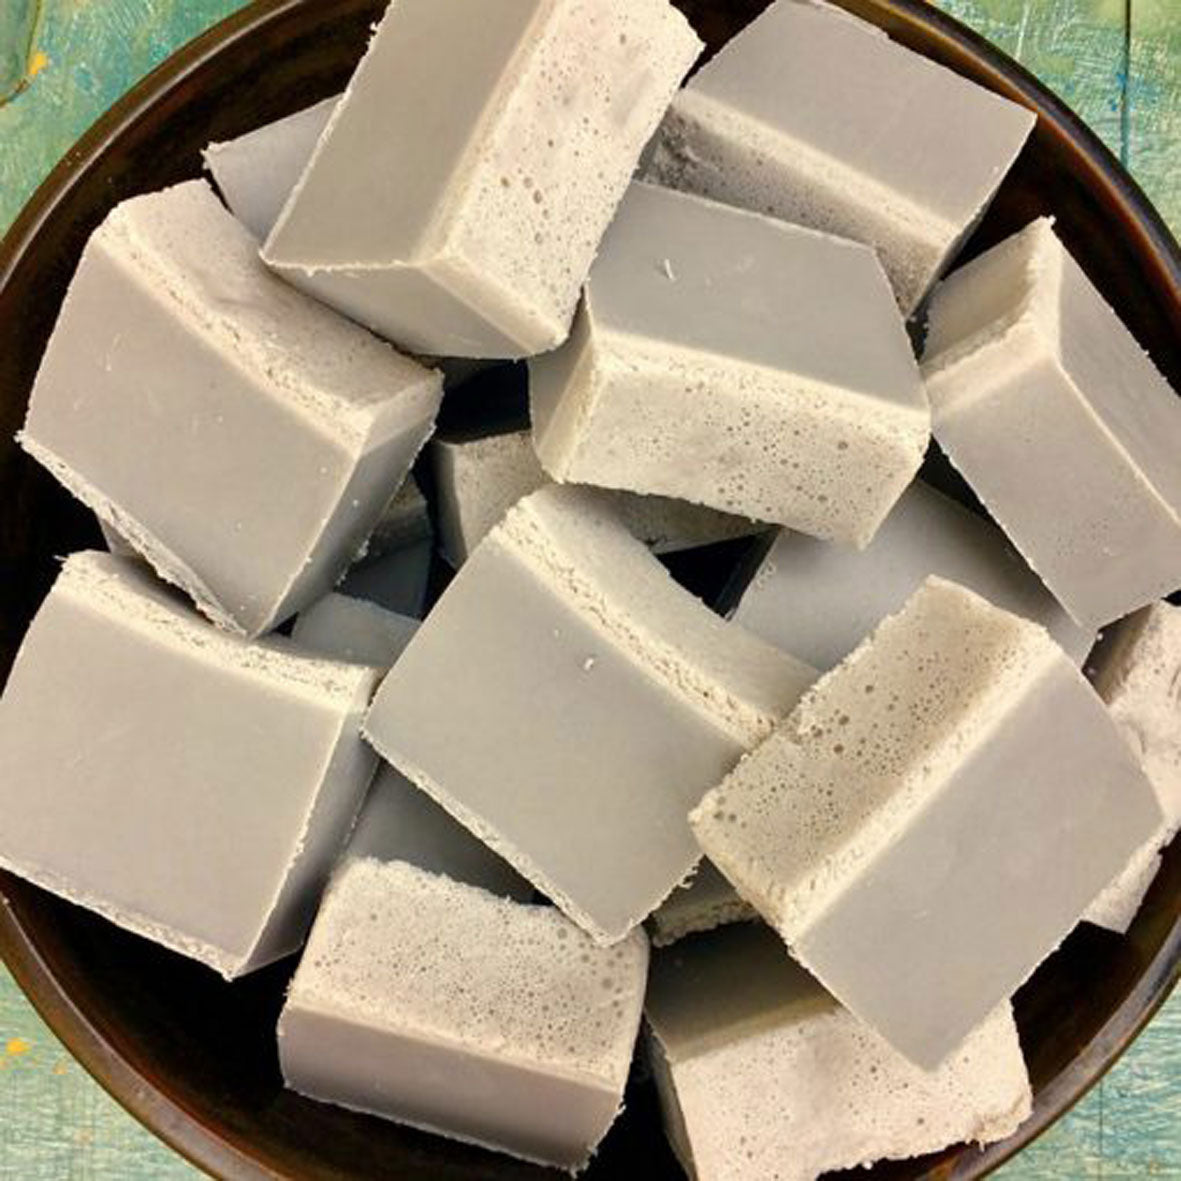 Planet Detox Kitchen Cleaning Soap